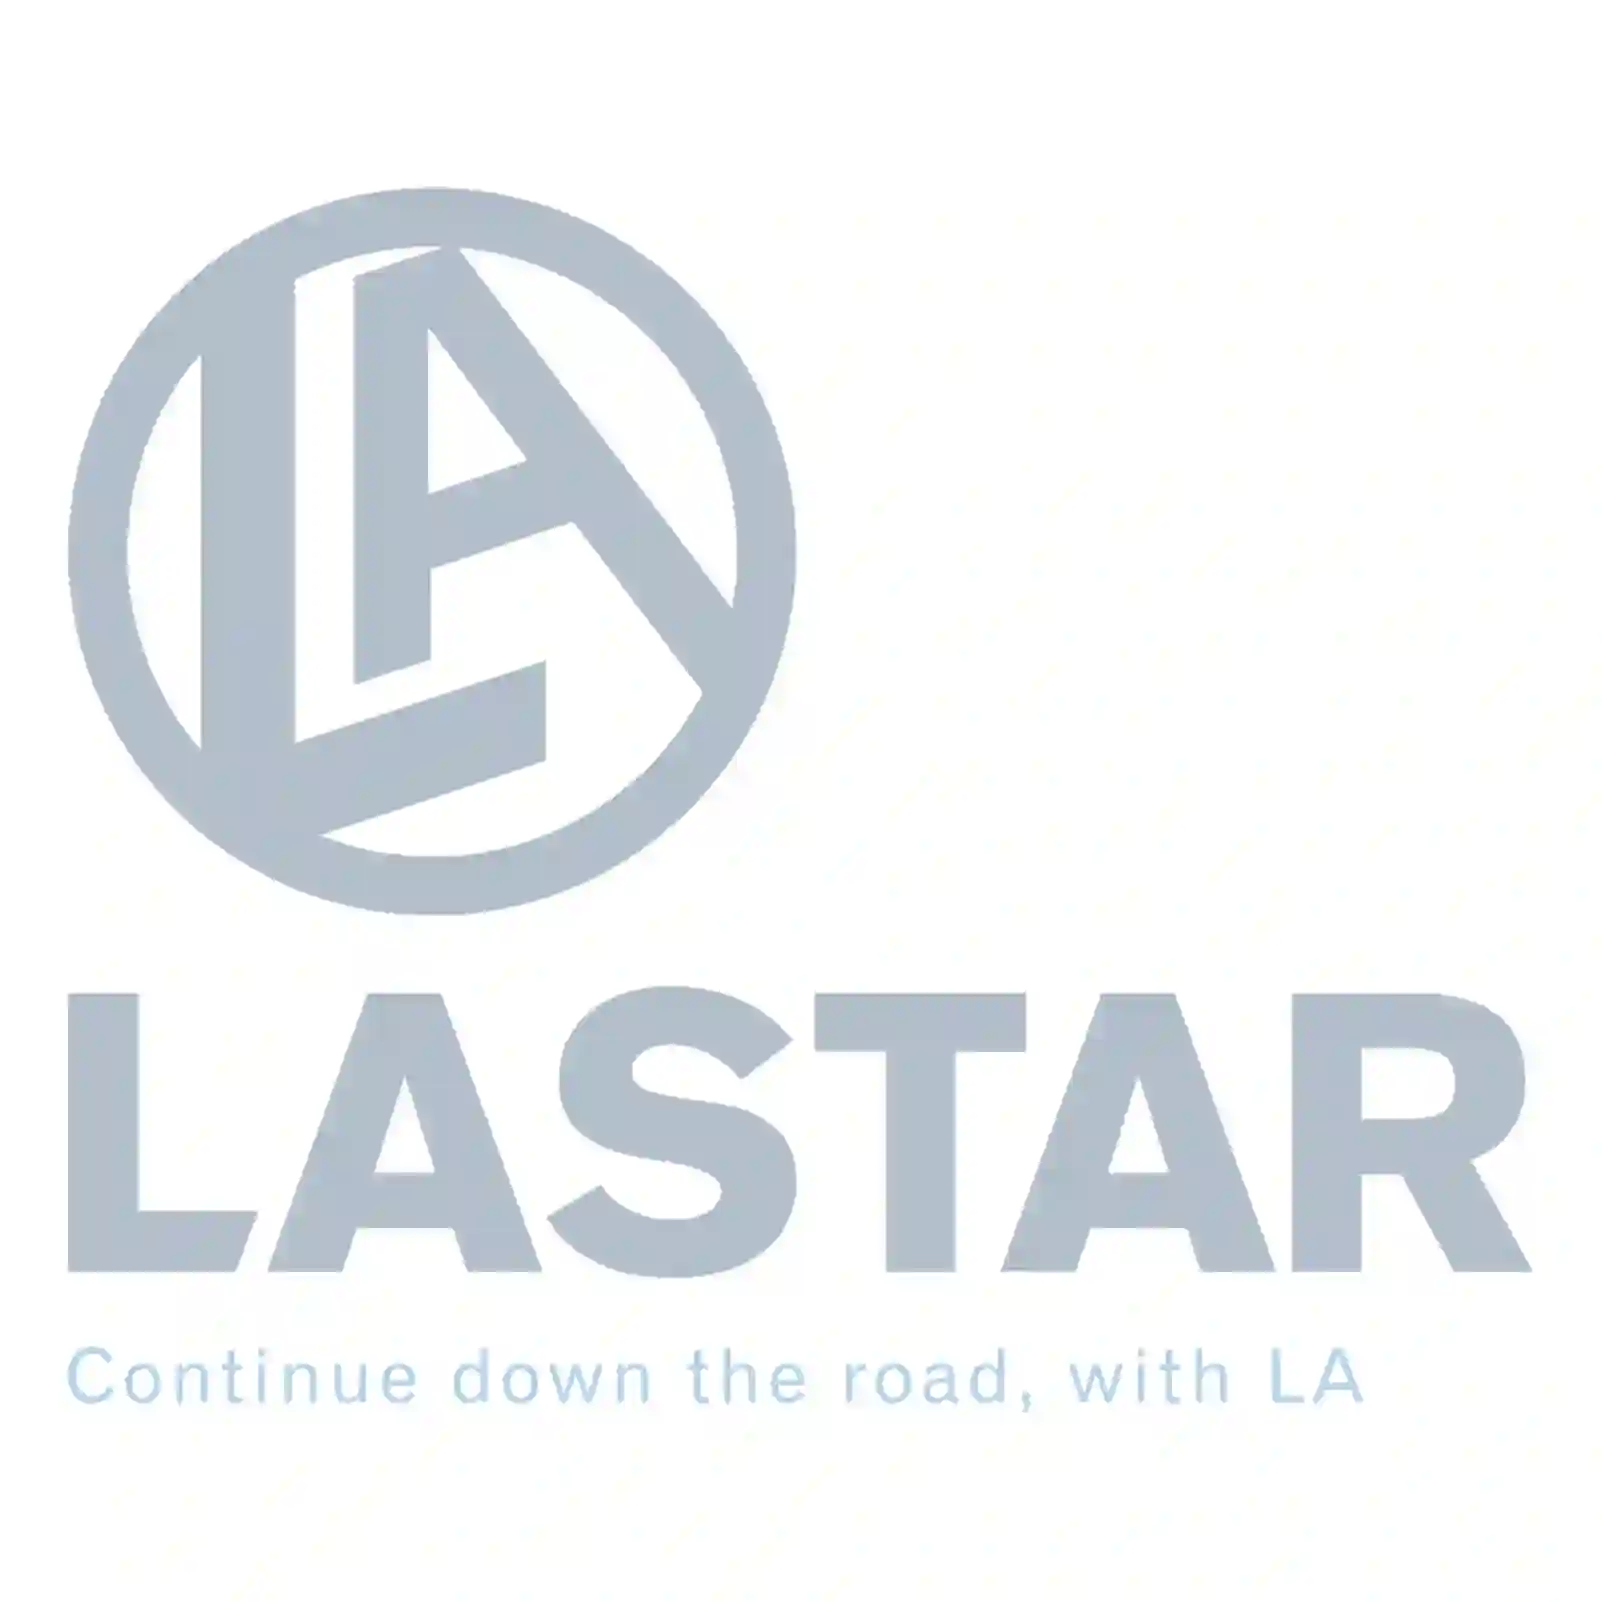 Step, right, 77719831, 1994787 ||  77719831 Lastar Spare Part | Truck Spare Parts, Auotomotive Spare Parts Step, right, 77719831, 1994787 ||  77719831 Lastar Spare Part | Truck Spare Parts, Auotomotive Spare Parts